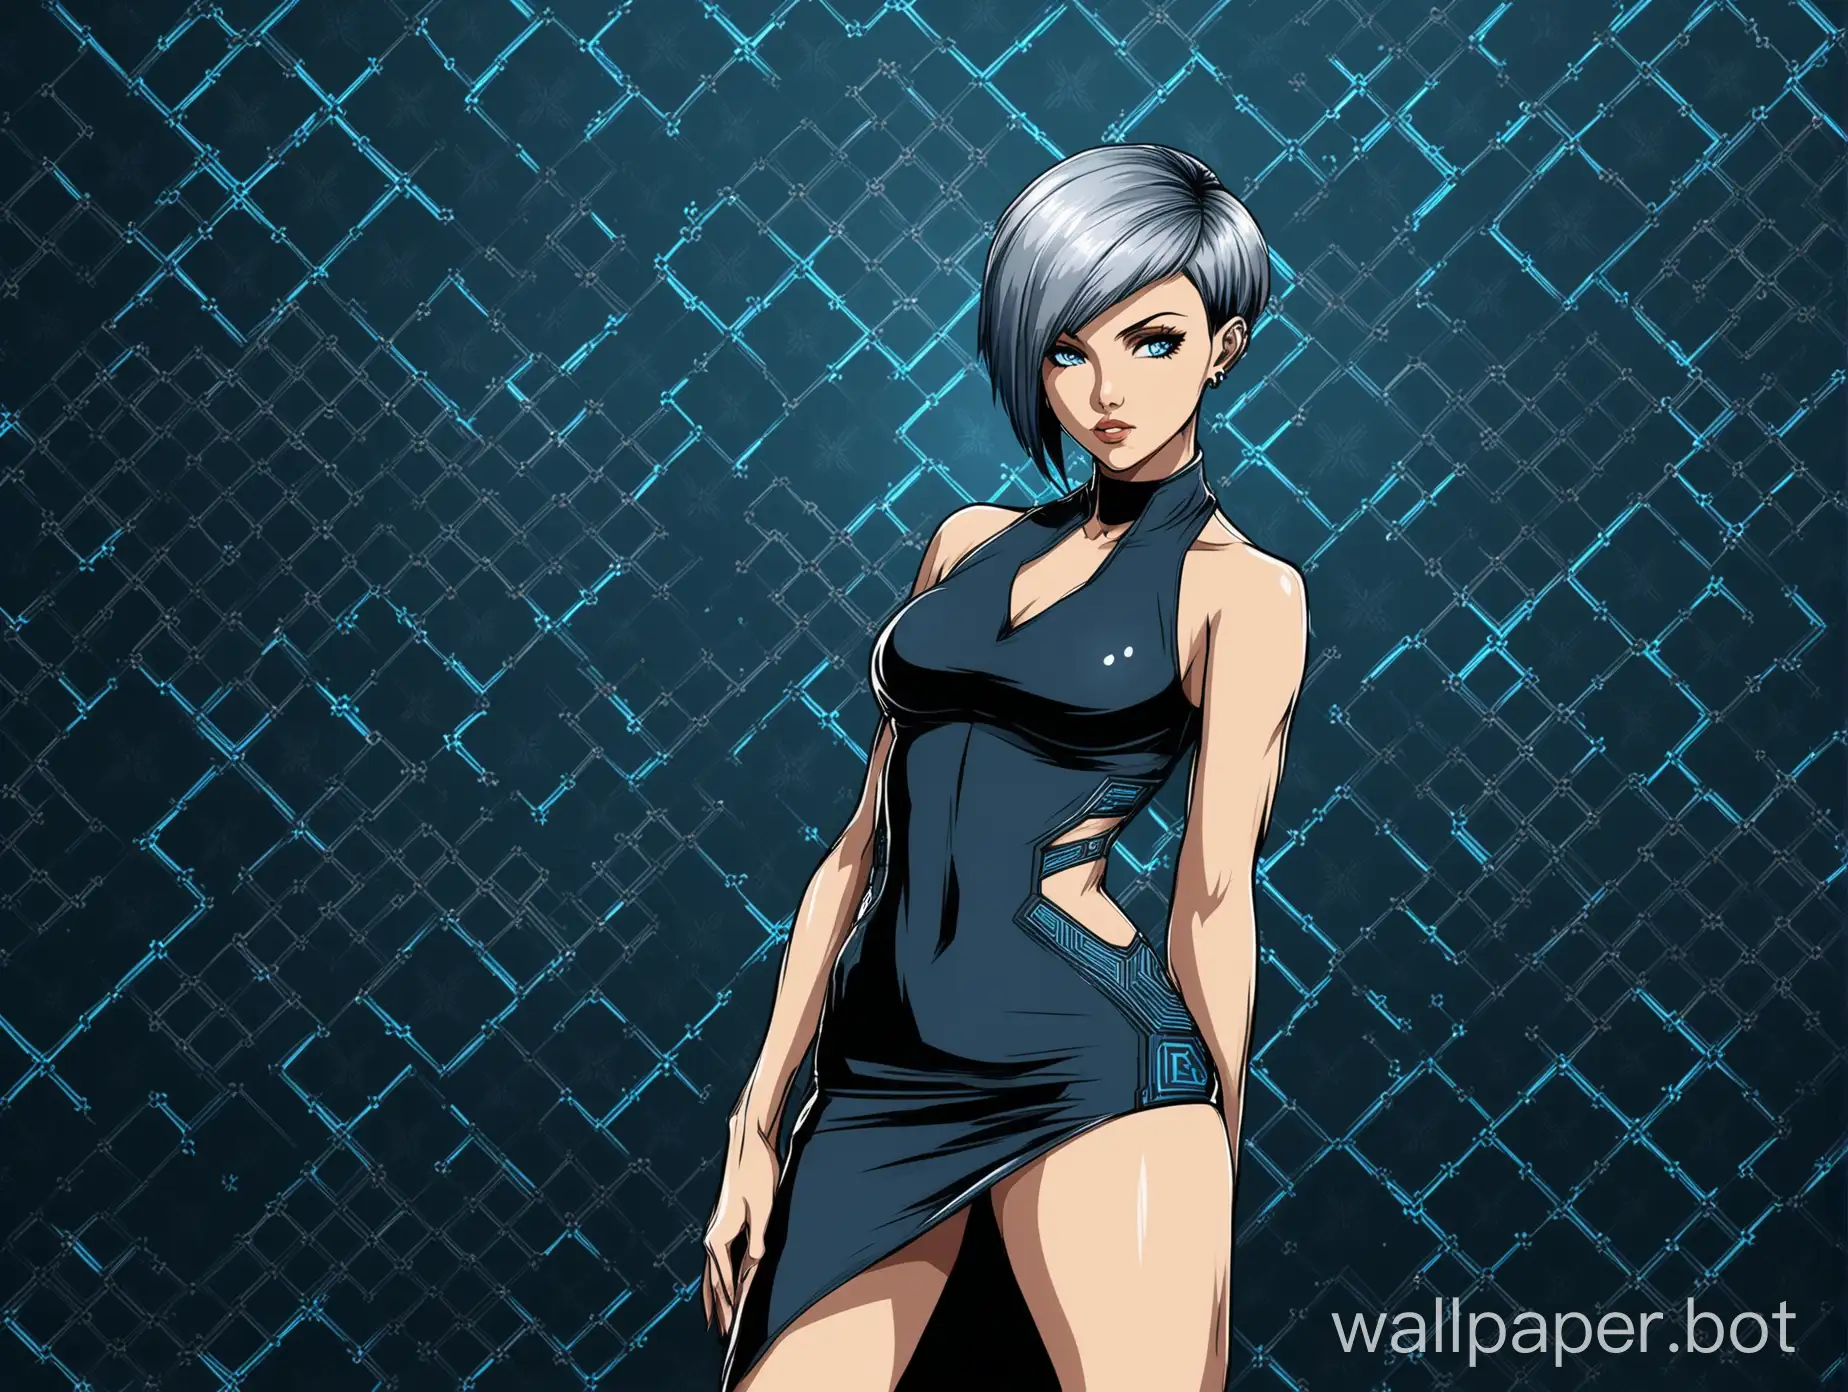 Sultry-Anime-Female-Character-with-Vibrant-Blue-Short-Hairstyle-Edgy-and-Confident-Wallpaper-Inspired-by-Ruby-Rose-in-XXX-Return-of-Xander-Cage